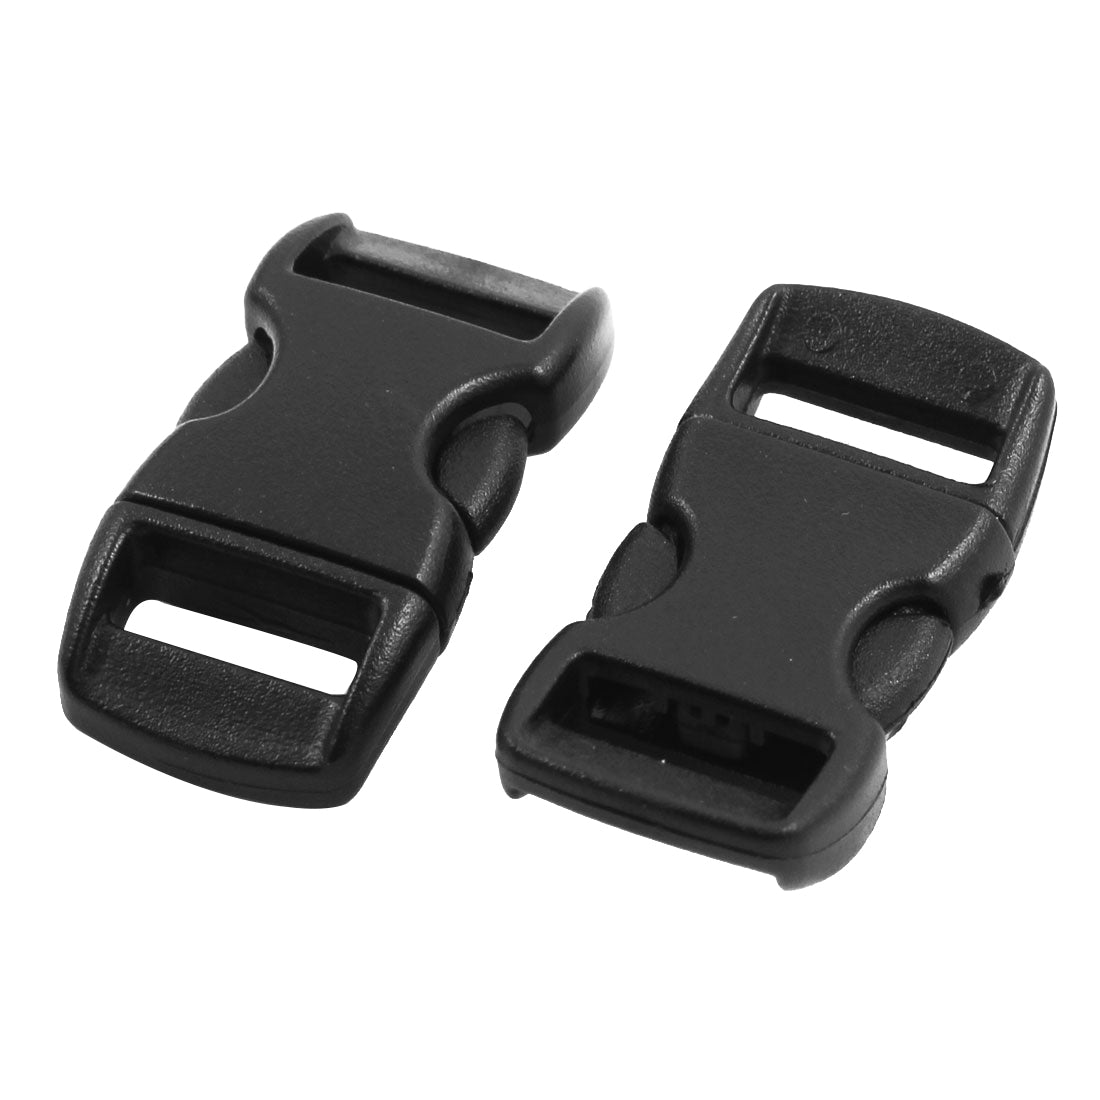 uxcell Uxcell Backpack Plastic Connecting Side Quick Release Buckle Black 11mm Strap Width 8pcs